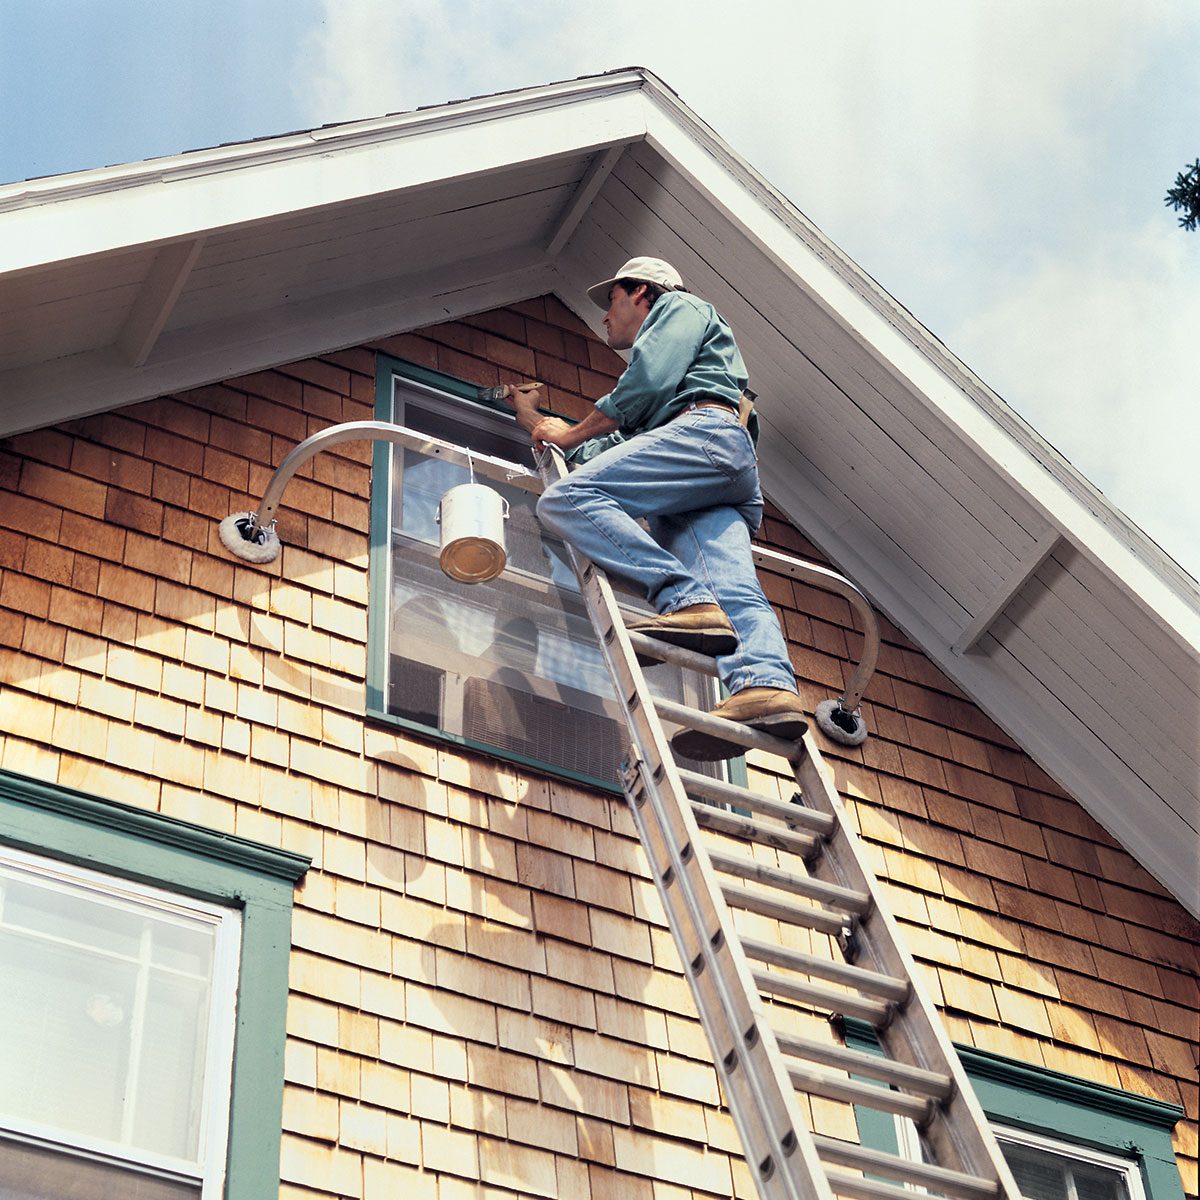 A person in a green shirt and jeans stands on a tall ladder, painting the upper exterior of a house with wood siding. They are using a paintbrush and a bucket of paint attached to the ladder. The house features a gable roof and green-trimmed windows.